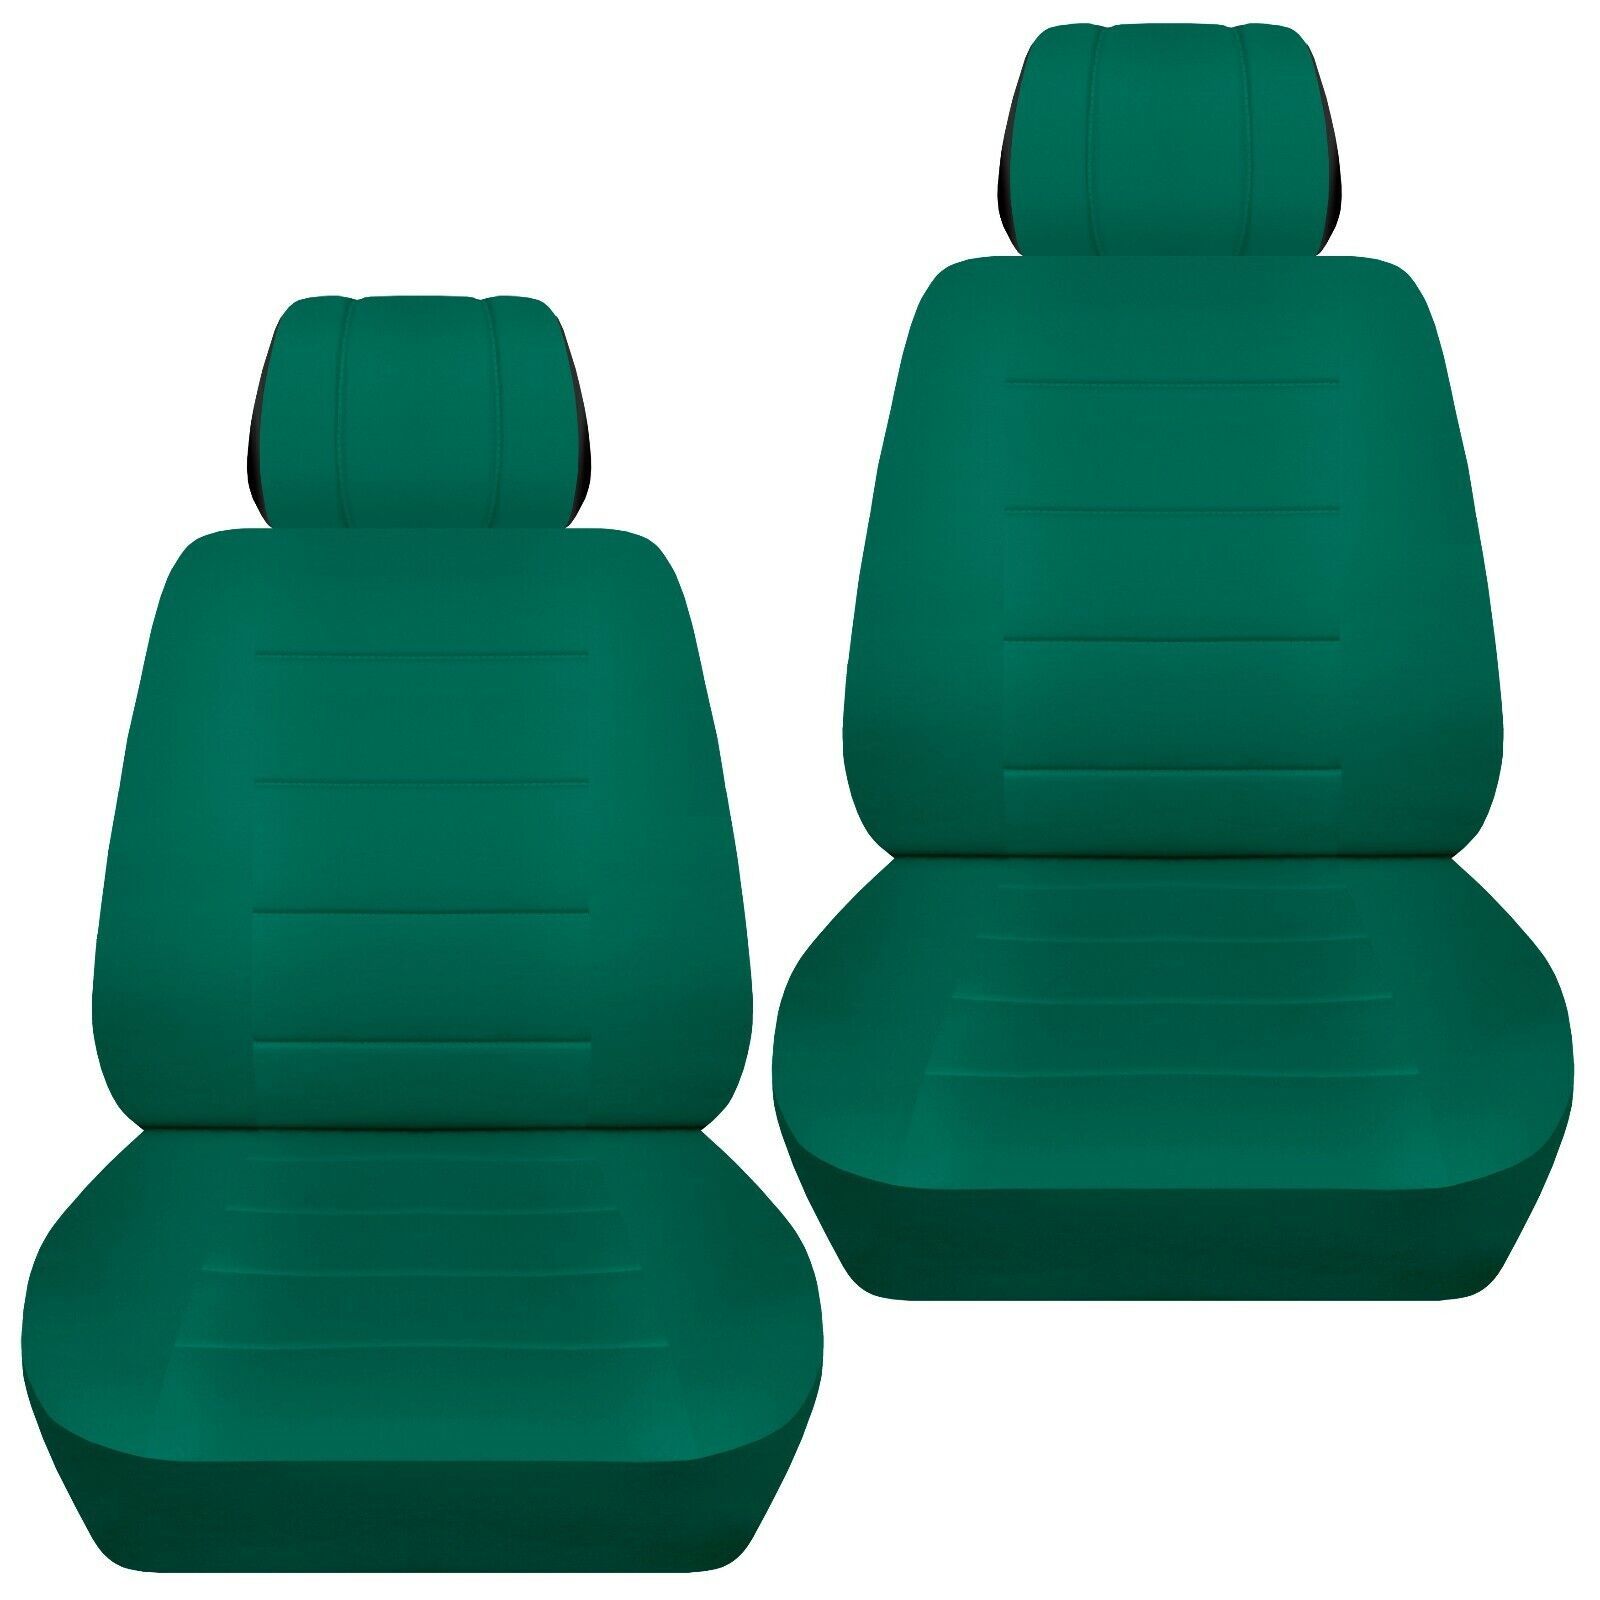 Primary image for Front set car seat covers fits 2006-2020 Honda Ridgeline     solid emerald green